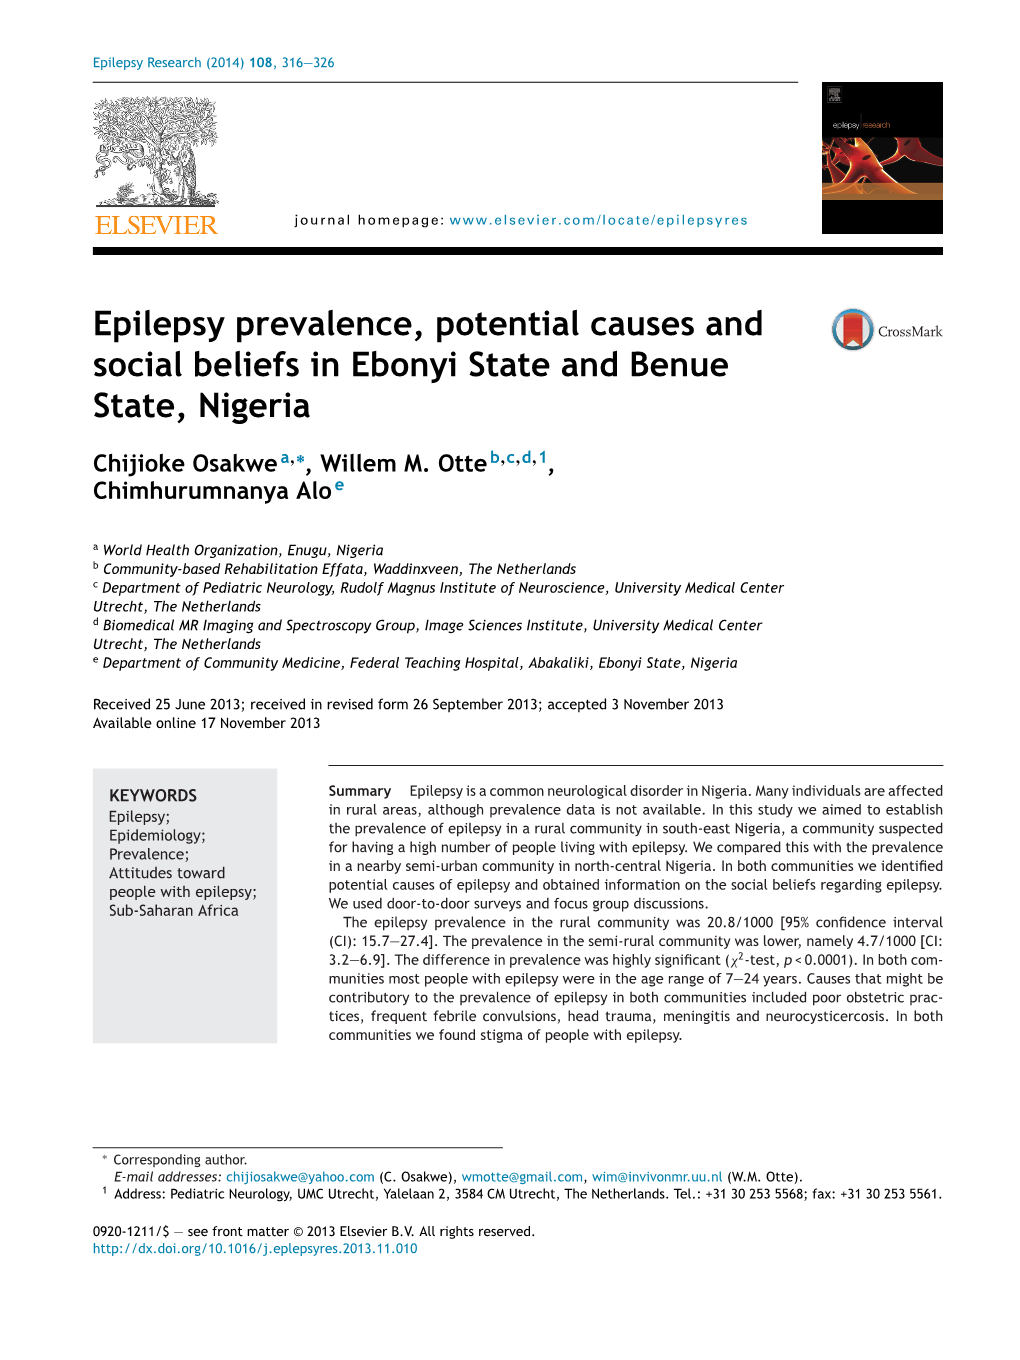 Epilepsy Prevalence, Potential Causes and Social Beliefs in Ebonyi State